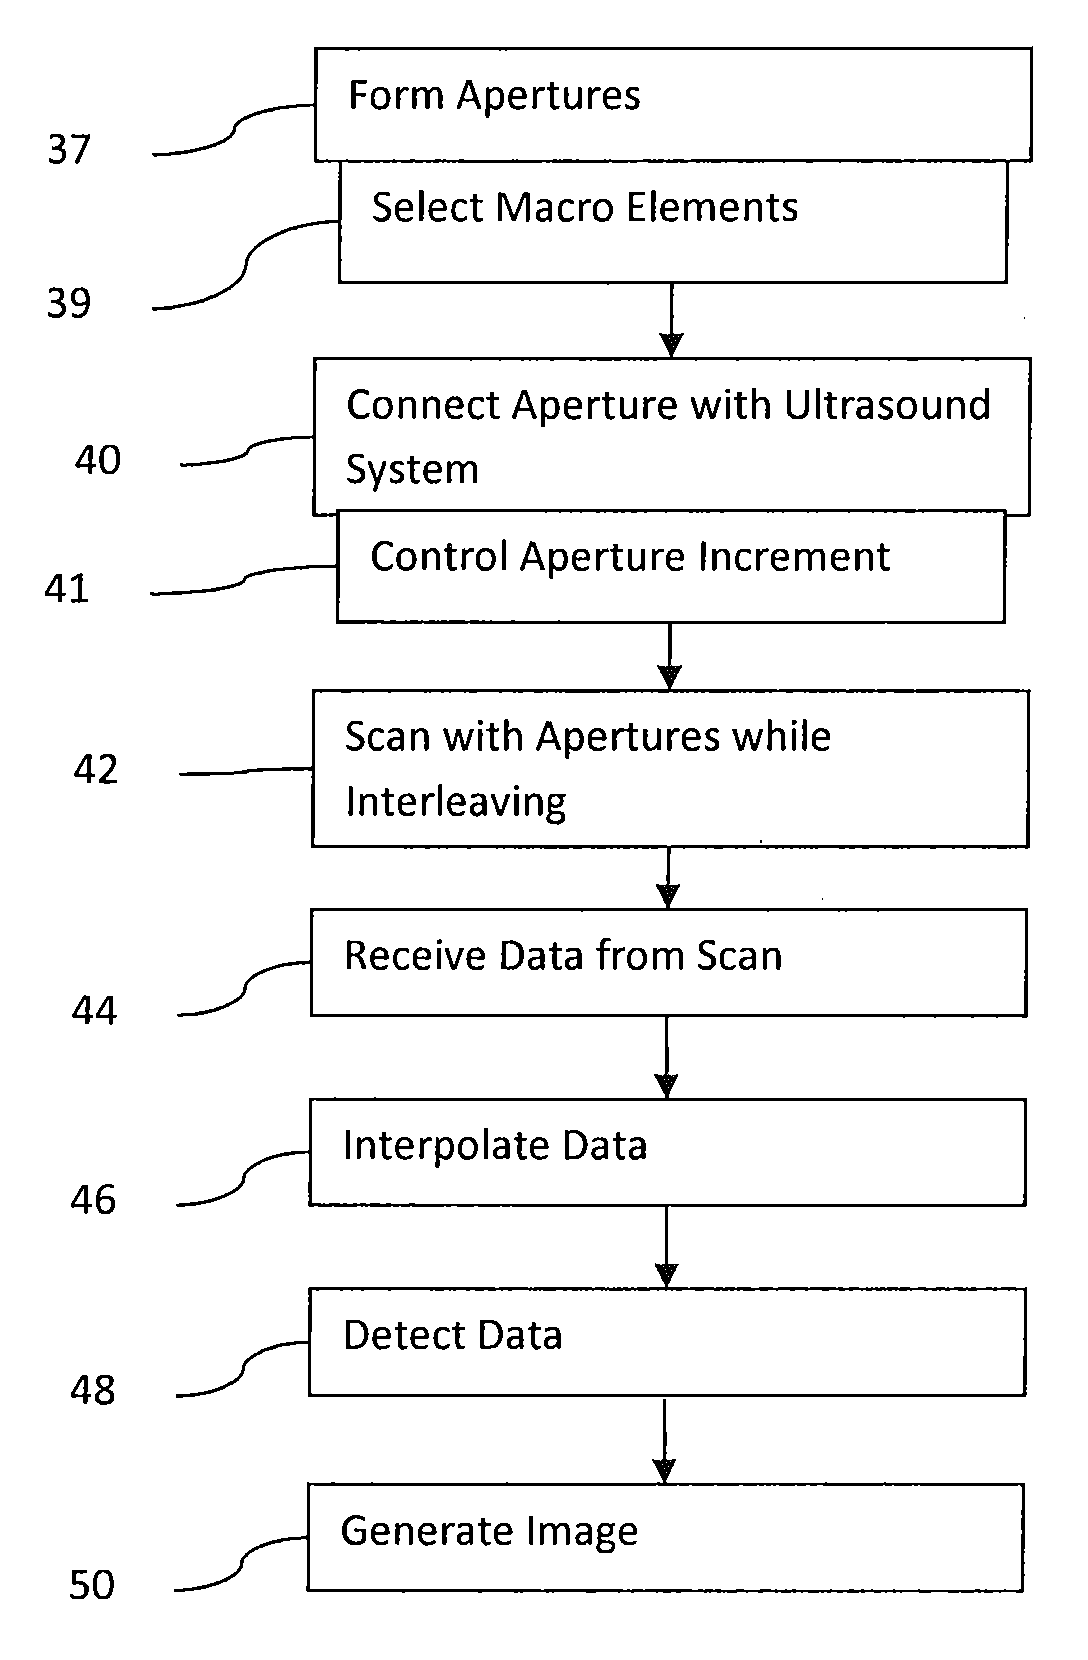 Redistribution Layer in an Ultrasound Diagnostic Imaging Transducer